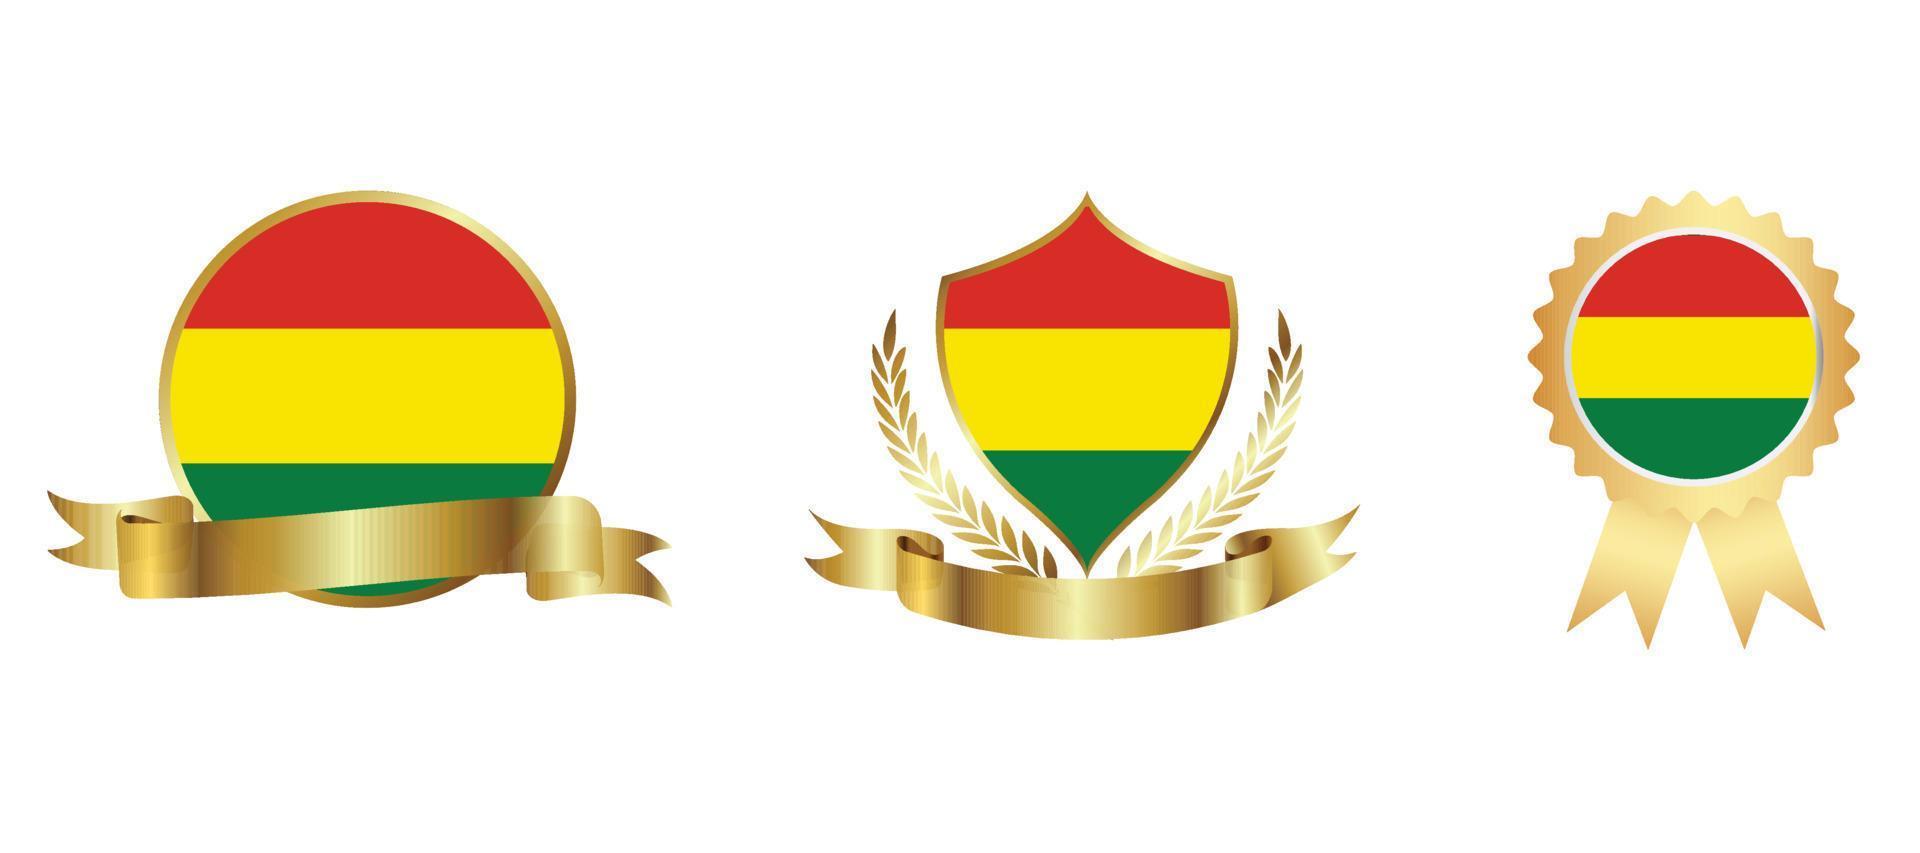 Bolivia flag icon . web icon set . icons collection flat. Simple vector illustration.